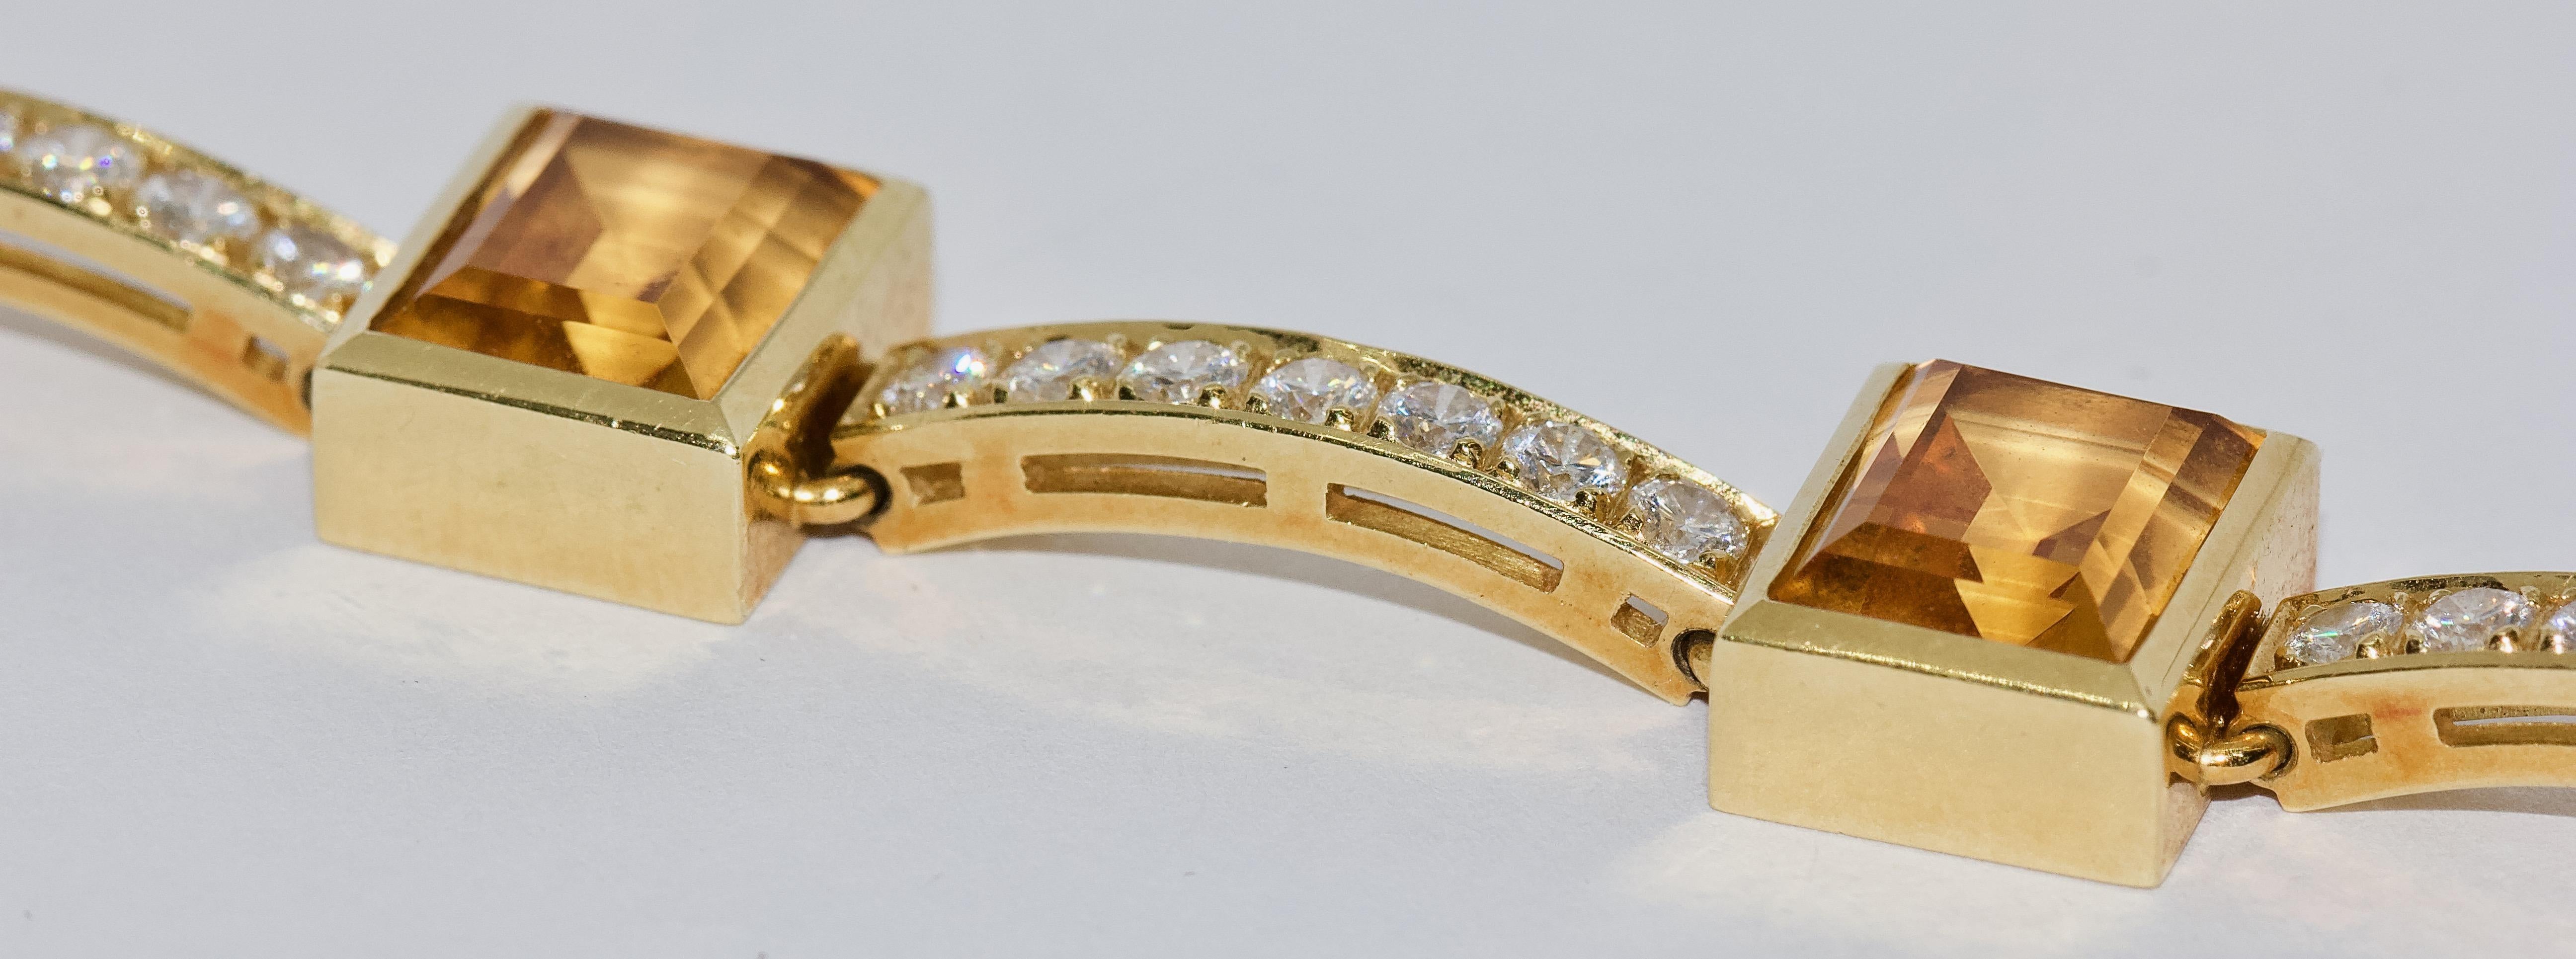 Women's Ladies Bracelet, Bangle in 18 Karat Gold, Set with Citrines and 41 Diamonds For Sale